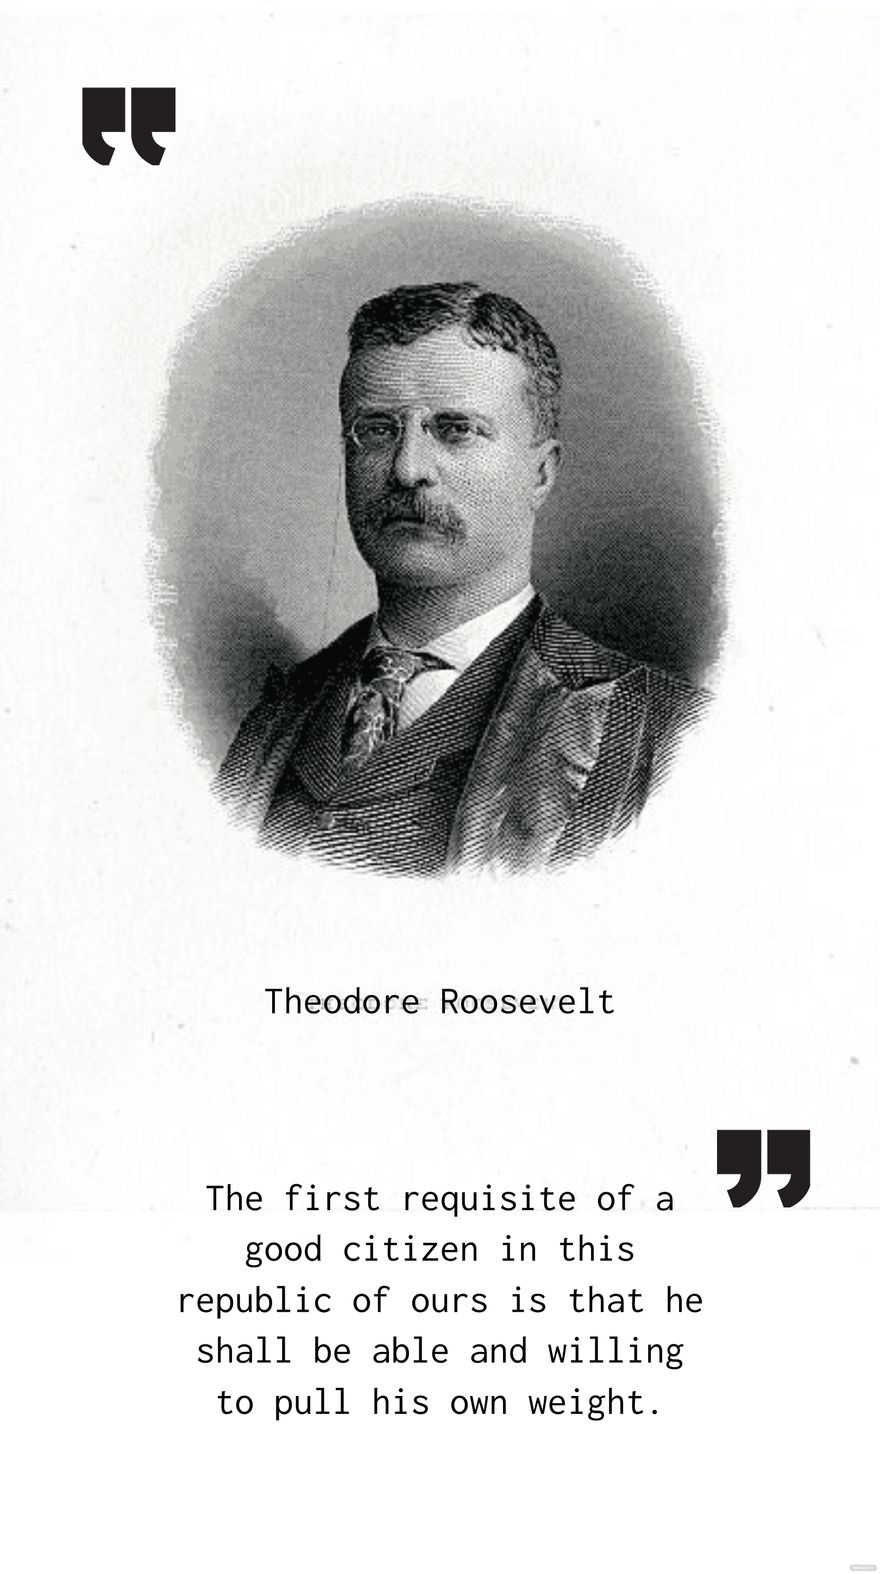 The first requisite of a good citizen in this republic of ours is that he shall be able and willing to pull his own weight. - Theodore Roosevelt